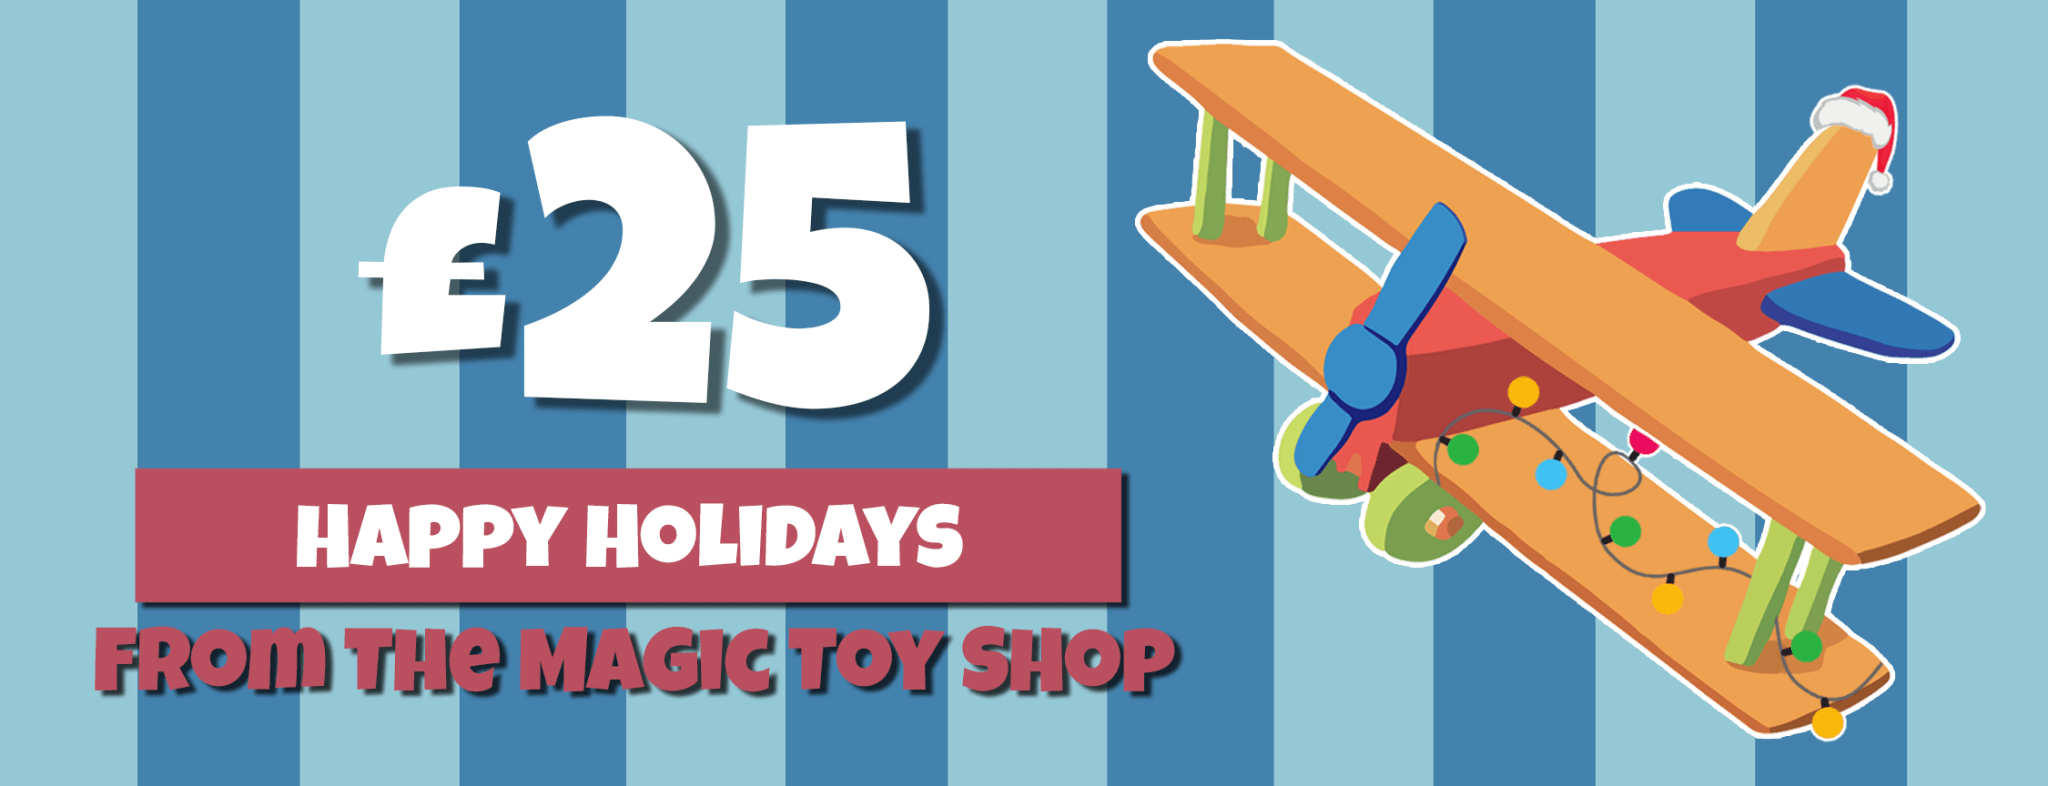 The Magic Toy Shop Holiday Gift Card The Magic Toy Shop - The Magic Toy Shop